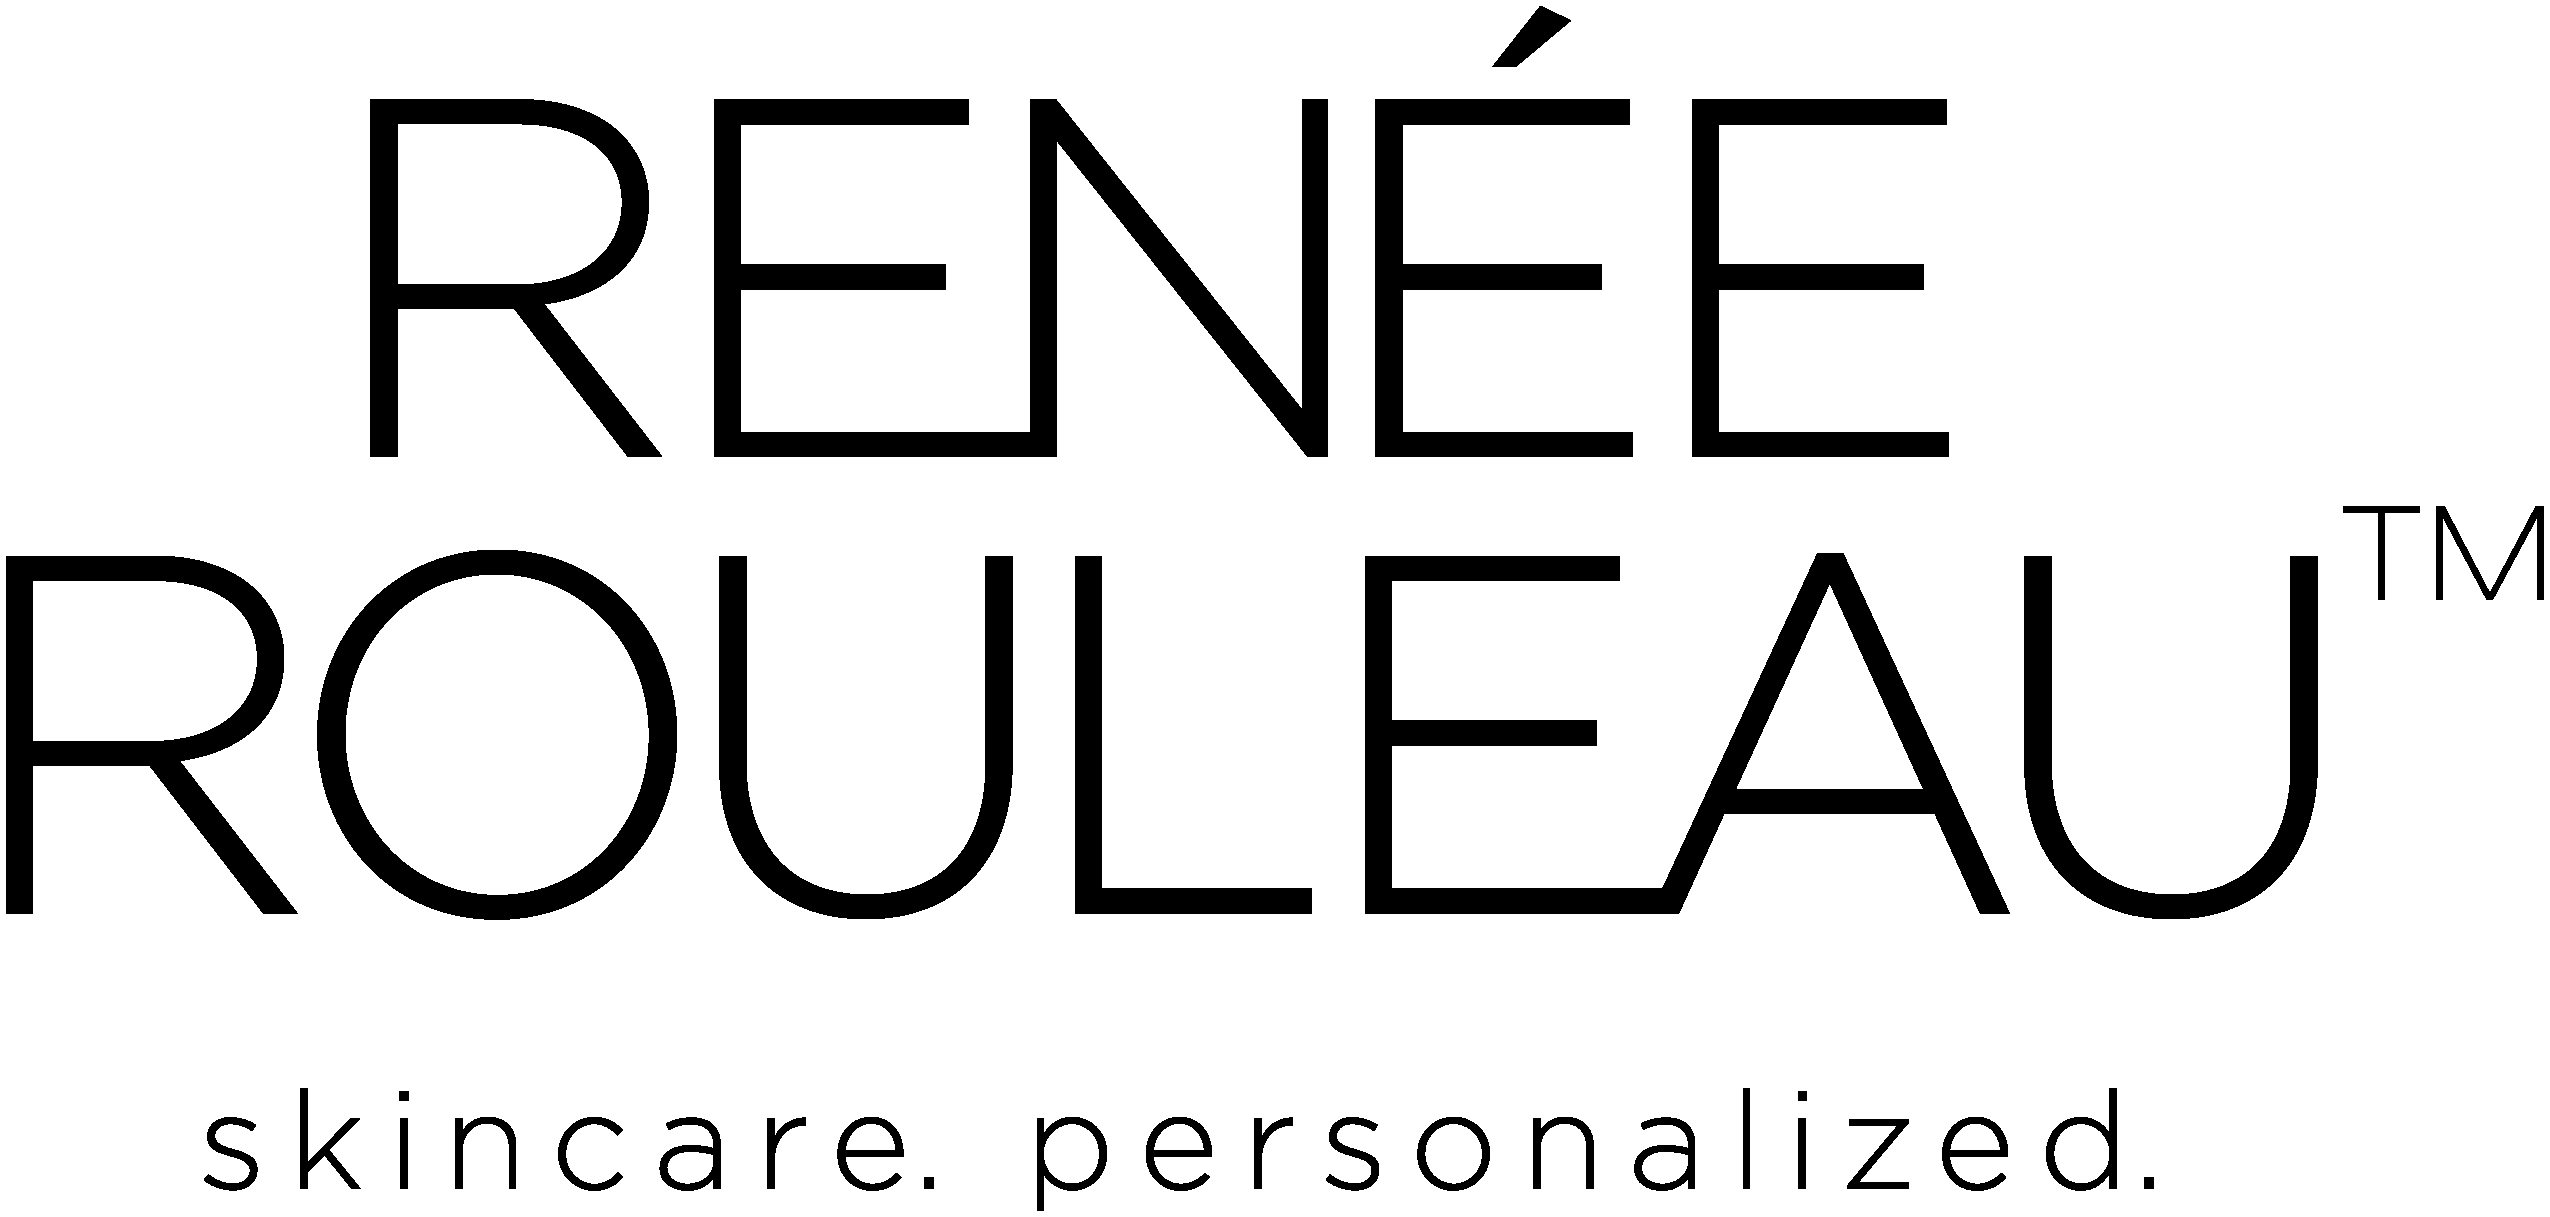 Image shows Renée Rouleau logo. The company is one of the brands we have produced UGC creator content for. 